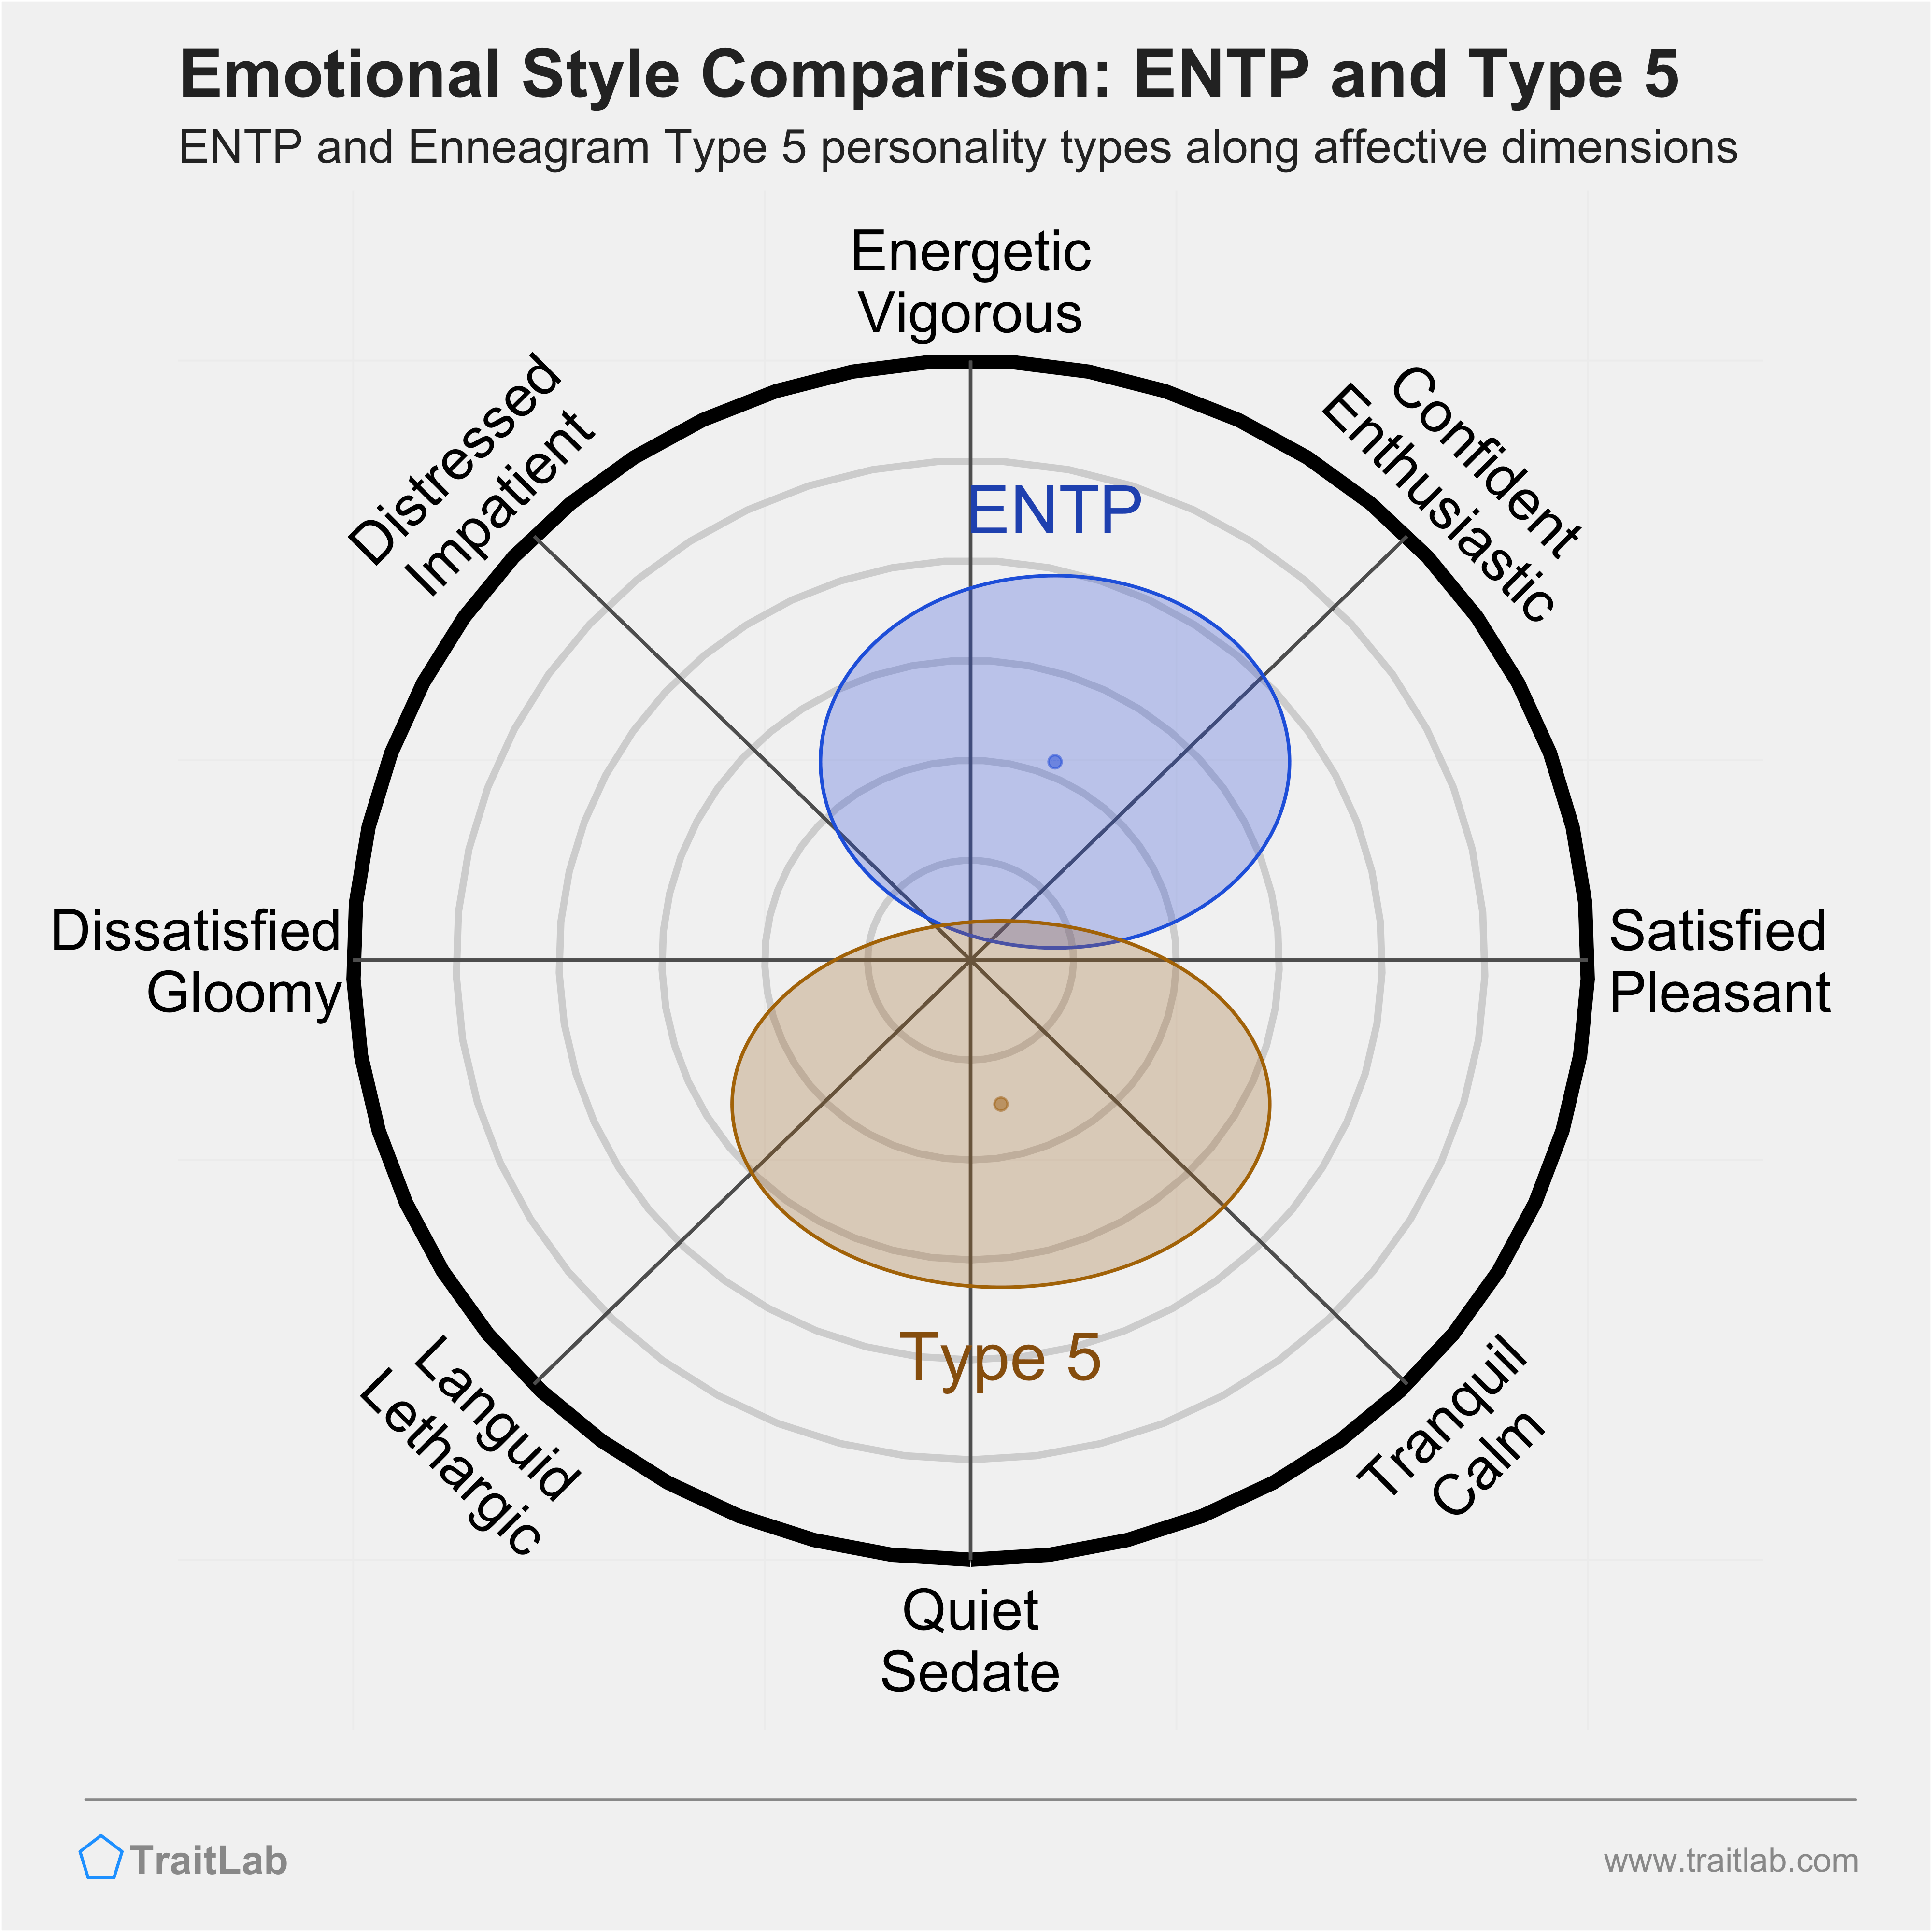 ENTP and Type 5 comparison across emotional (affective) dimensions